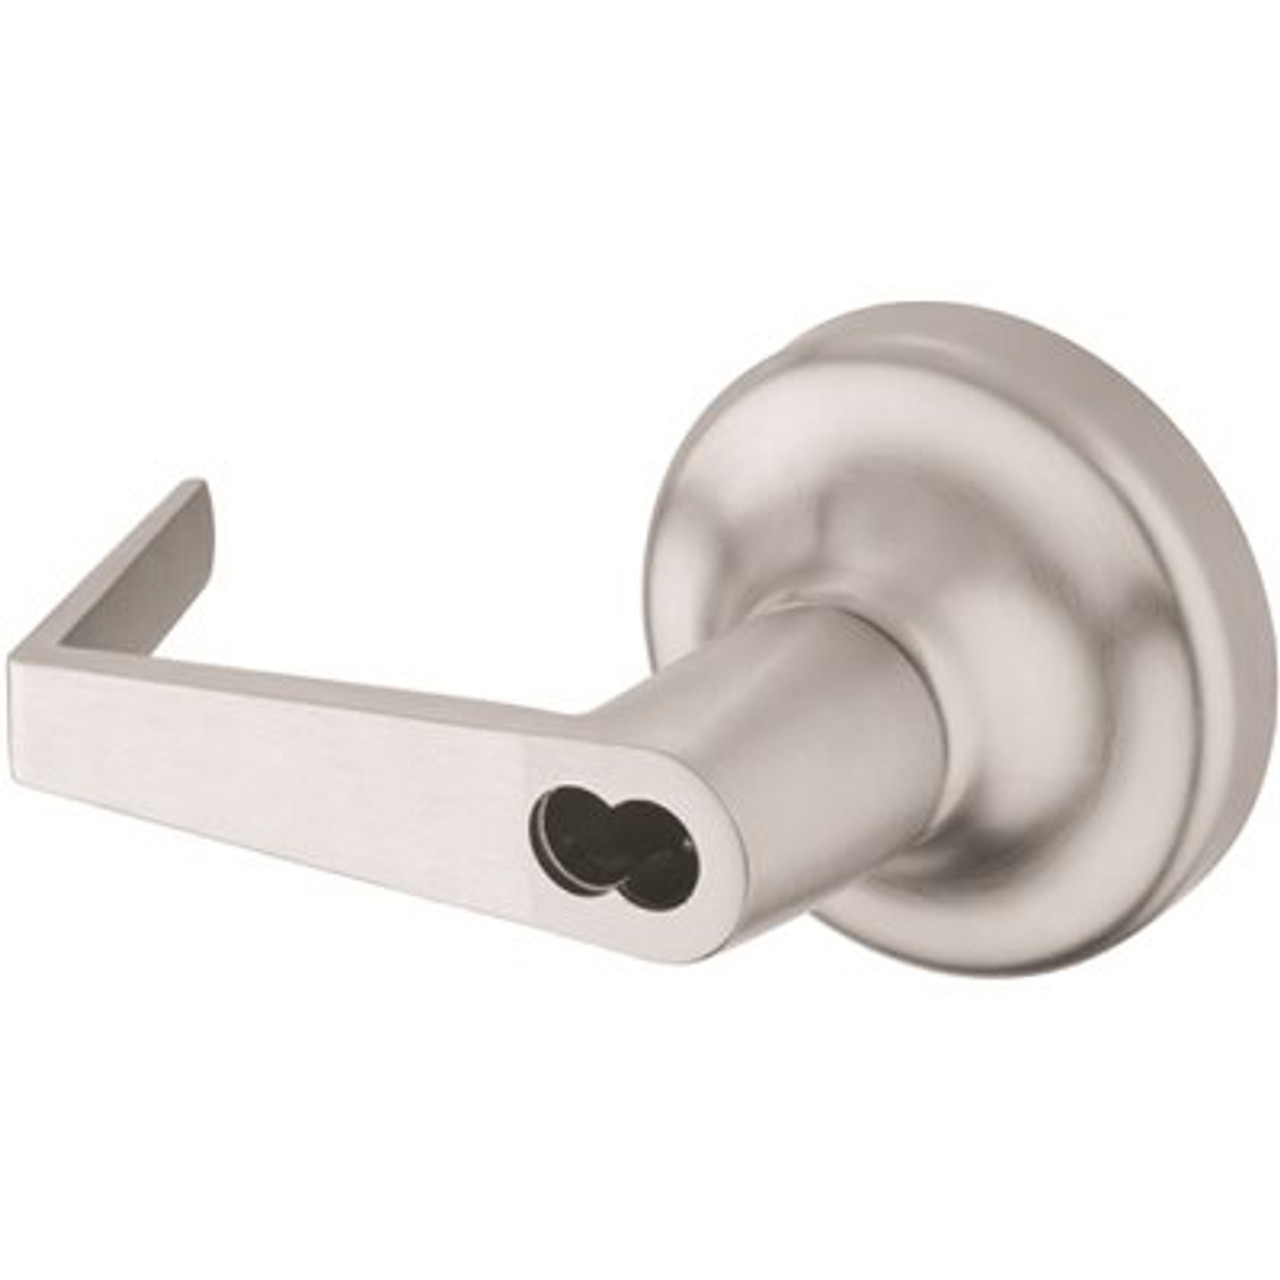 Yale 440F Series Exit Trim, Augusta Handle For Use With 2100 Series Exit Device, Less Core, Night Latch, Satin Chrome, Sfic